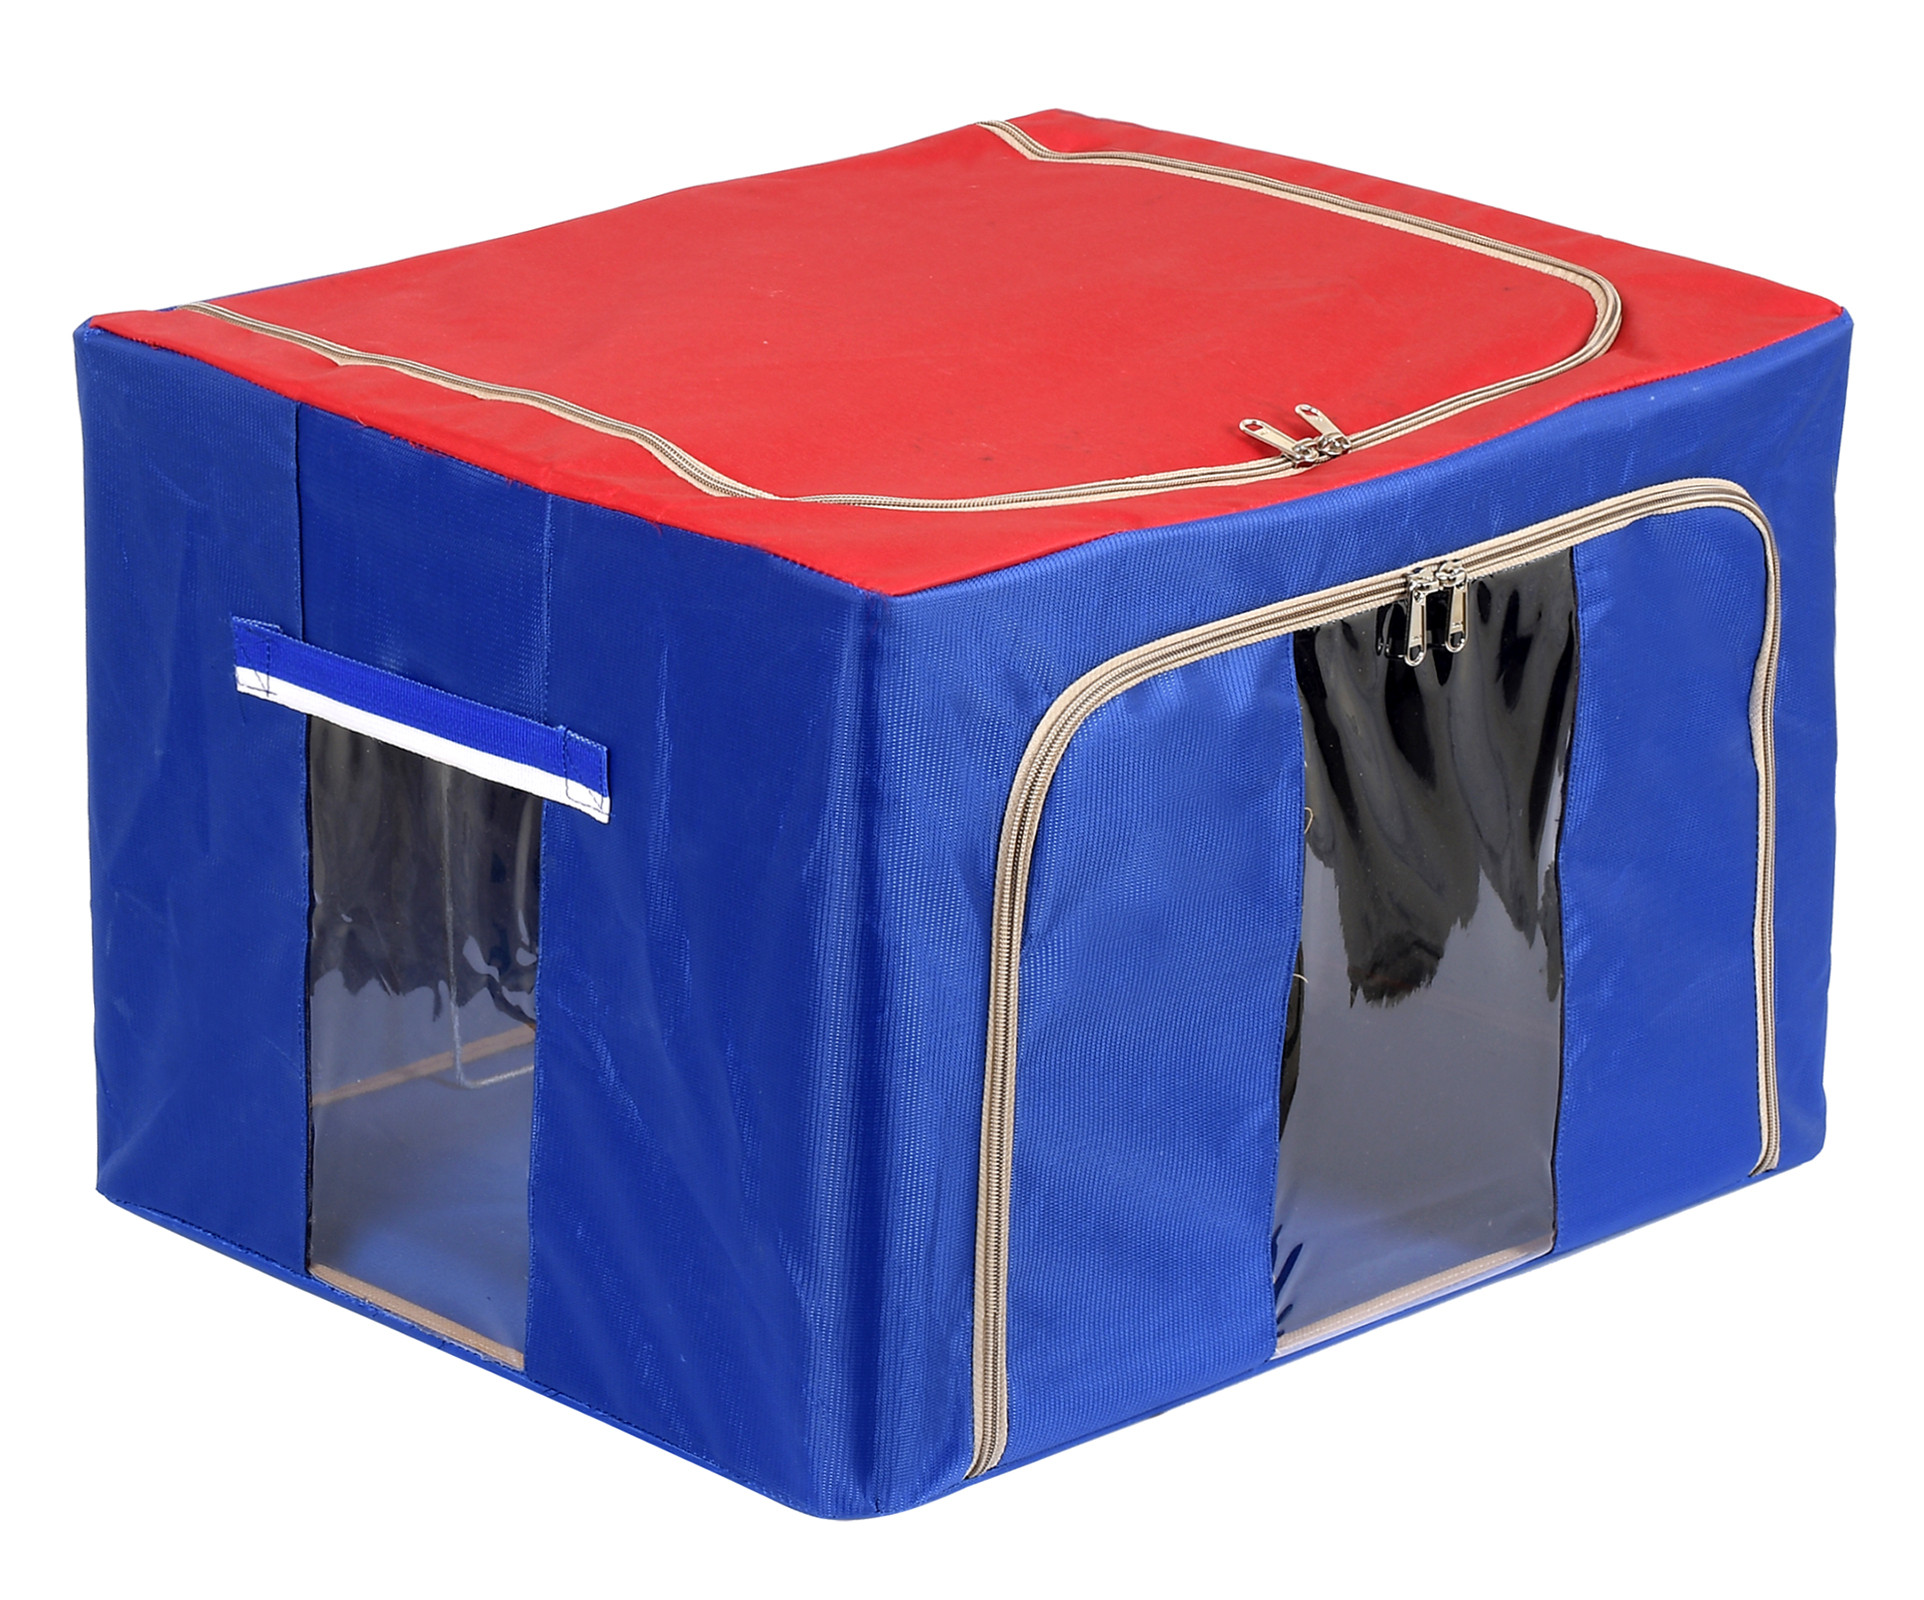 Kuber Industries Steel Frame Storage Box/Organizer For Clothing, Blankets, Bedding With Clear Window, 66Ltr. (Red & Blue)-44KM0309